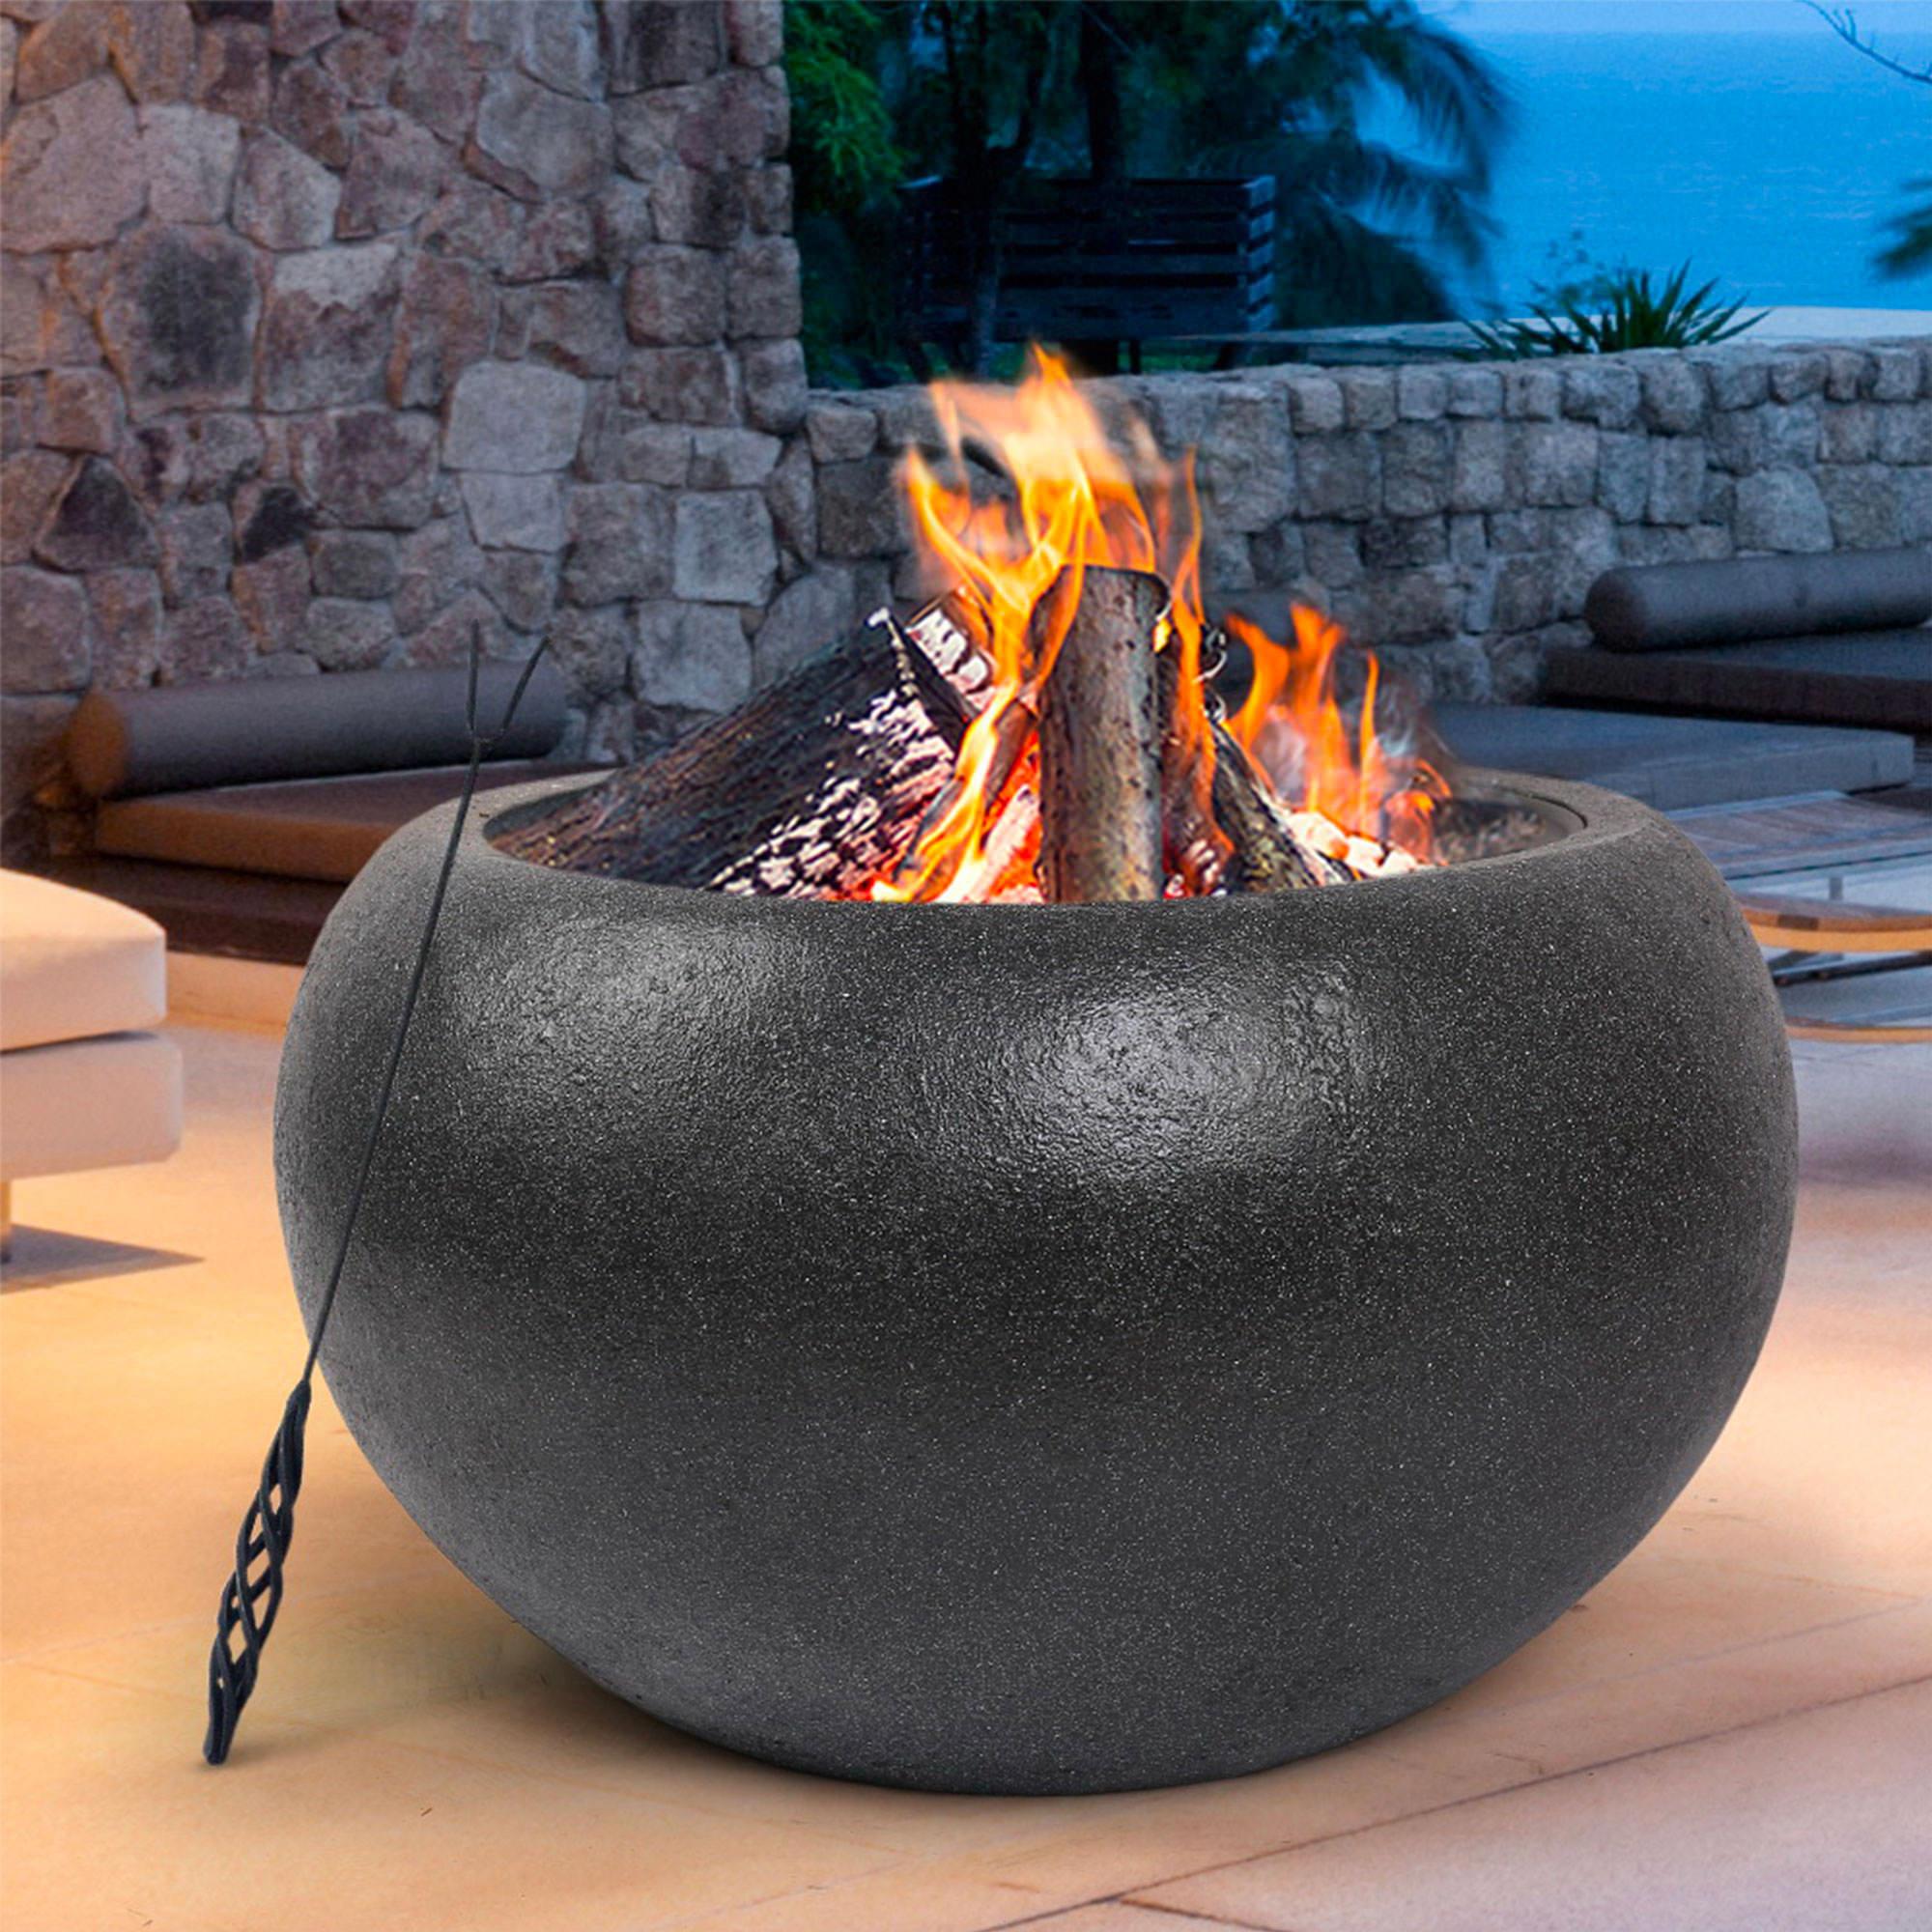 Grillz Oval Outdoor Fire Pit with Mesh Cover and Poker 61cm Image 2